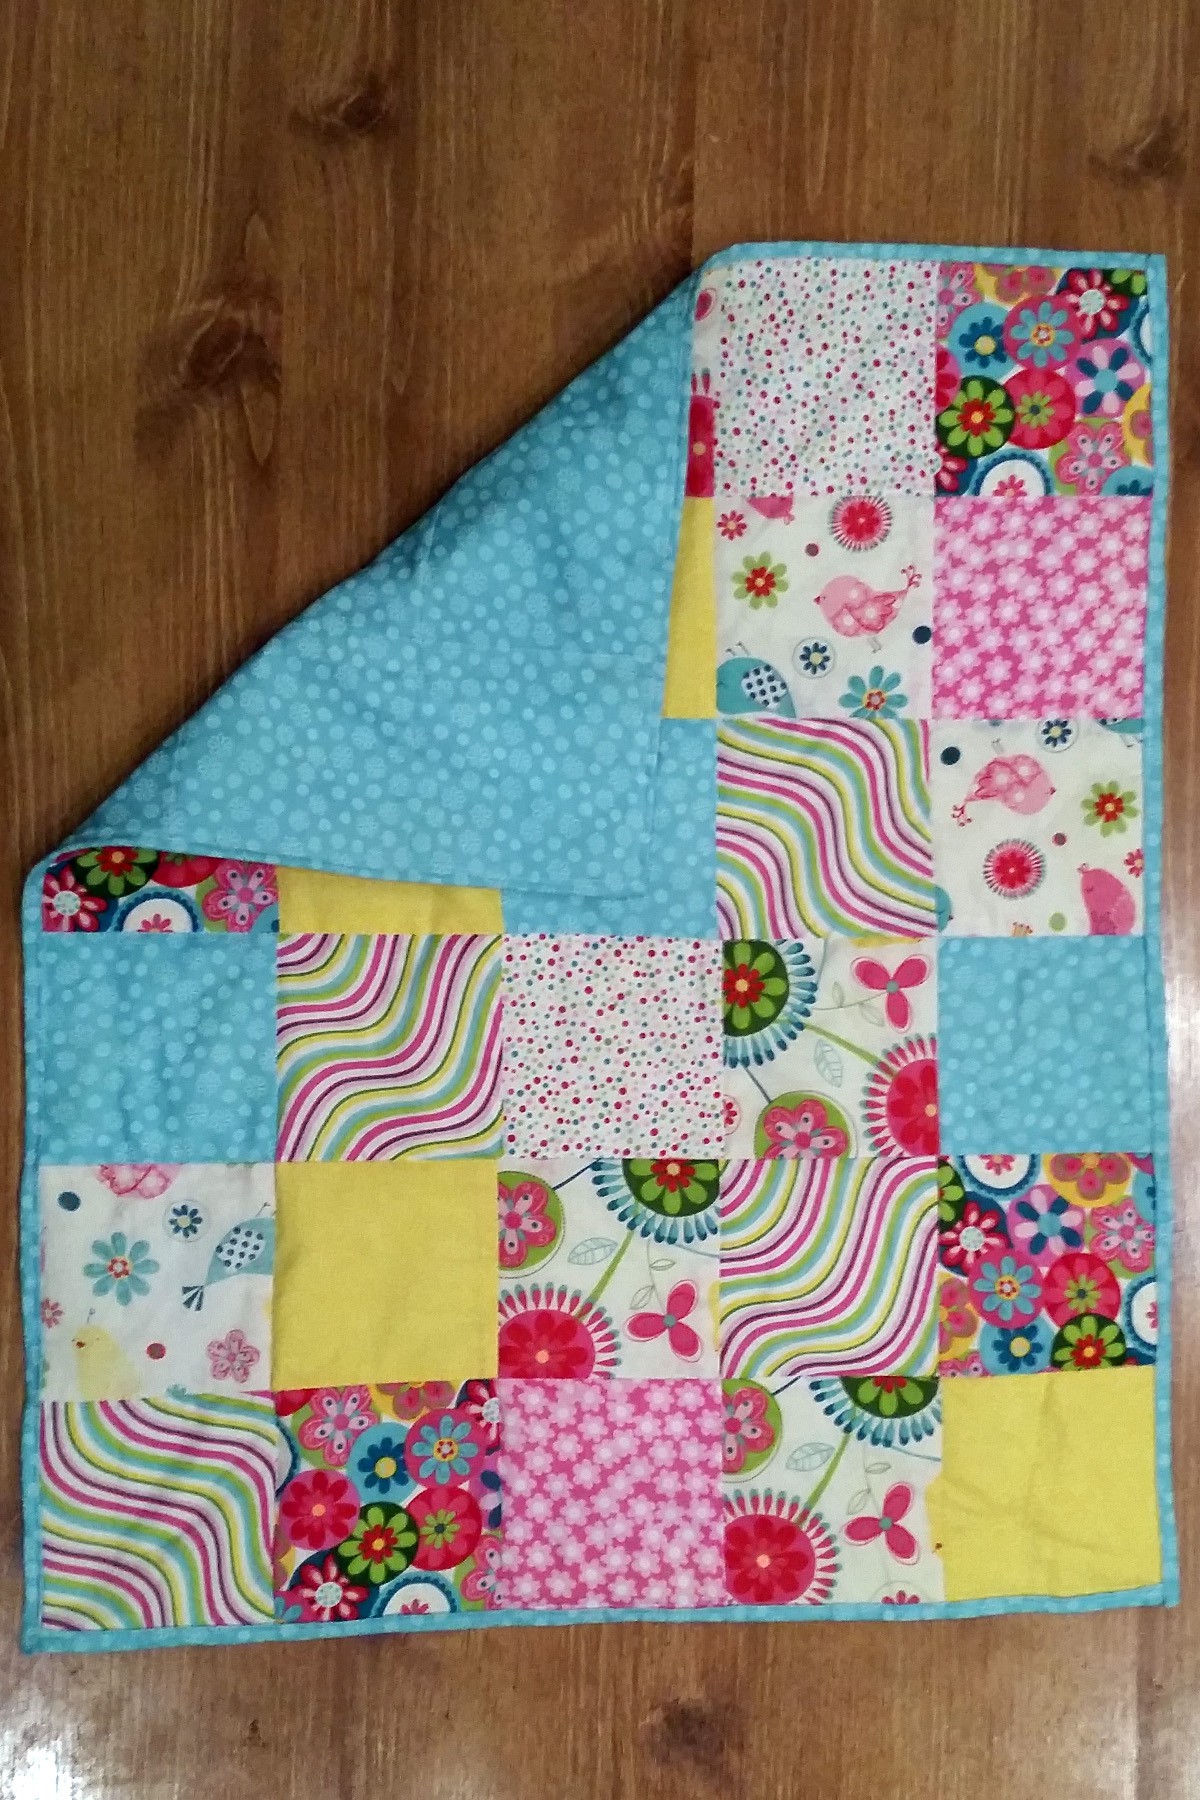 Pip the Pup’s Charm Pack Quilt